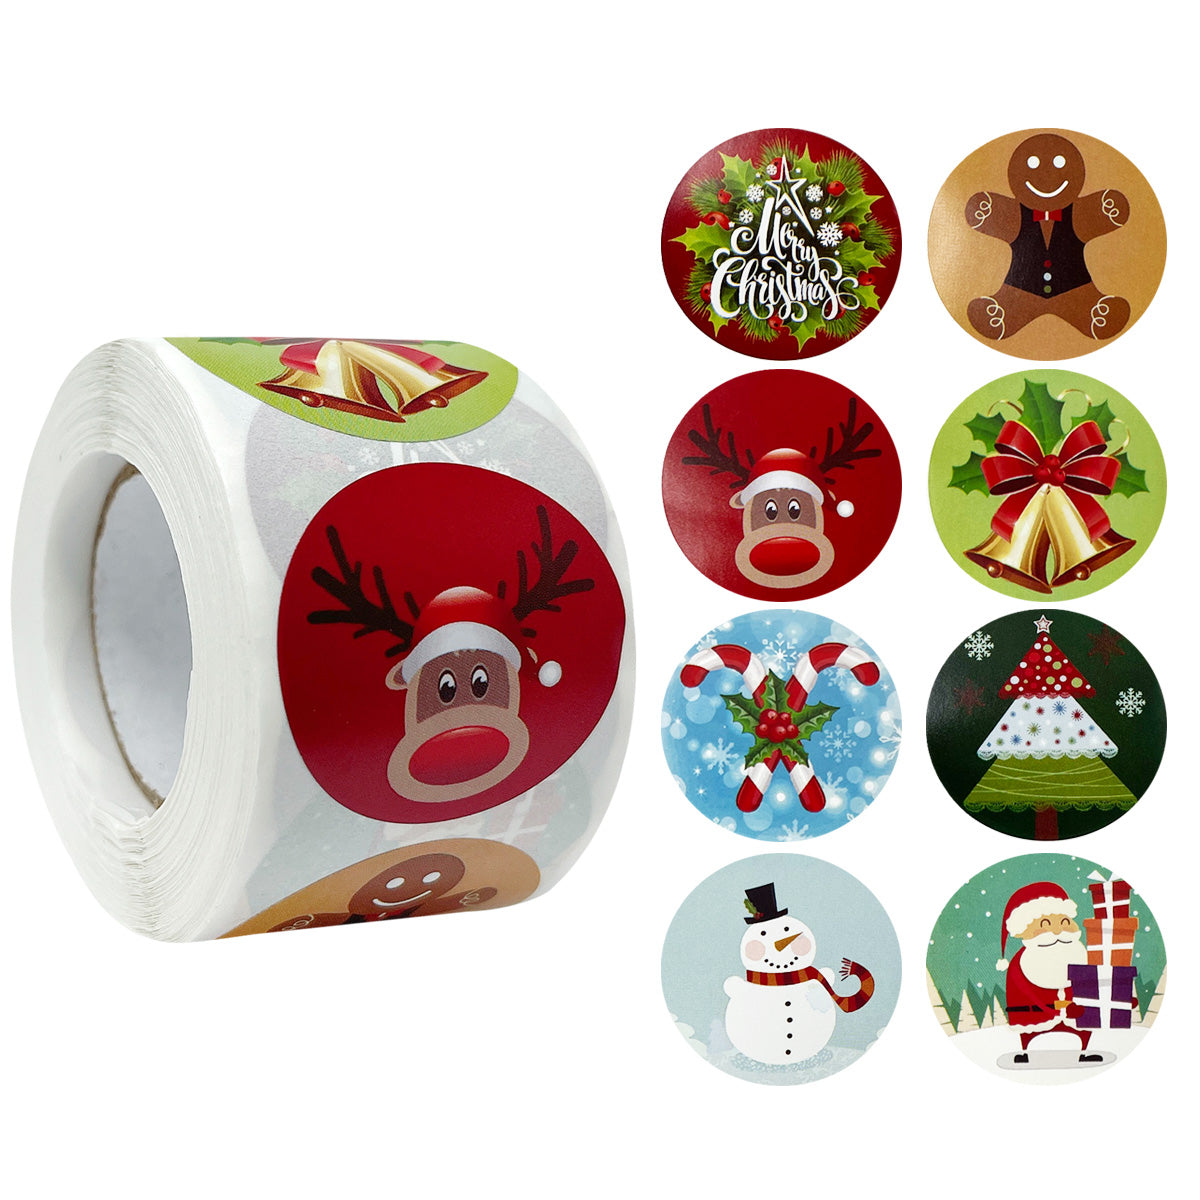 Wrapables Christmas Stickers Label Roll, Holiday Stickers for Sealing Cards, Envelopes, Gift Boxes, Festive Party Favors (500 Pcs) Reindeer & Santa